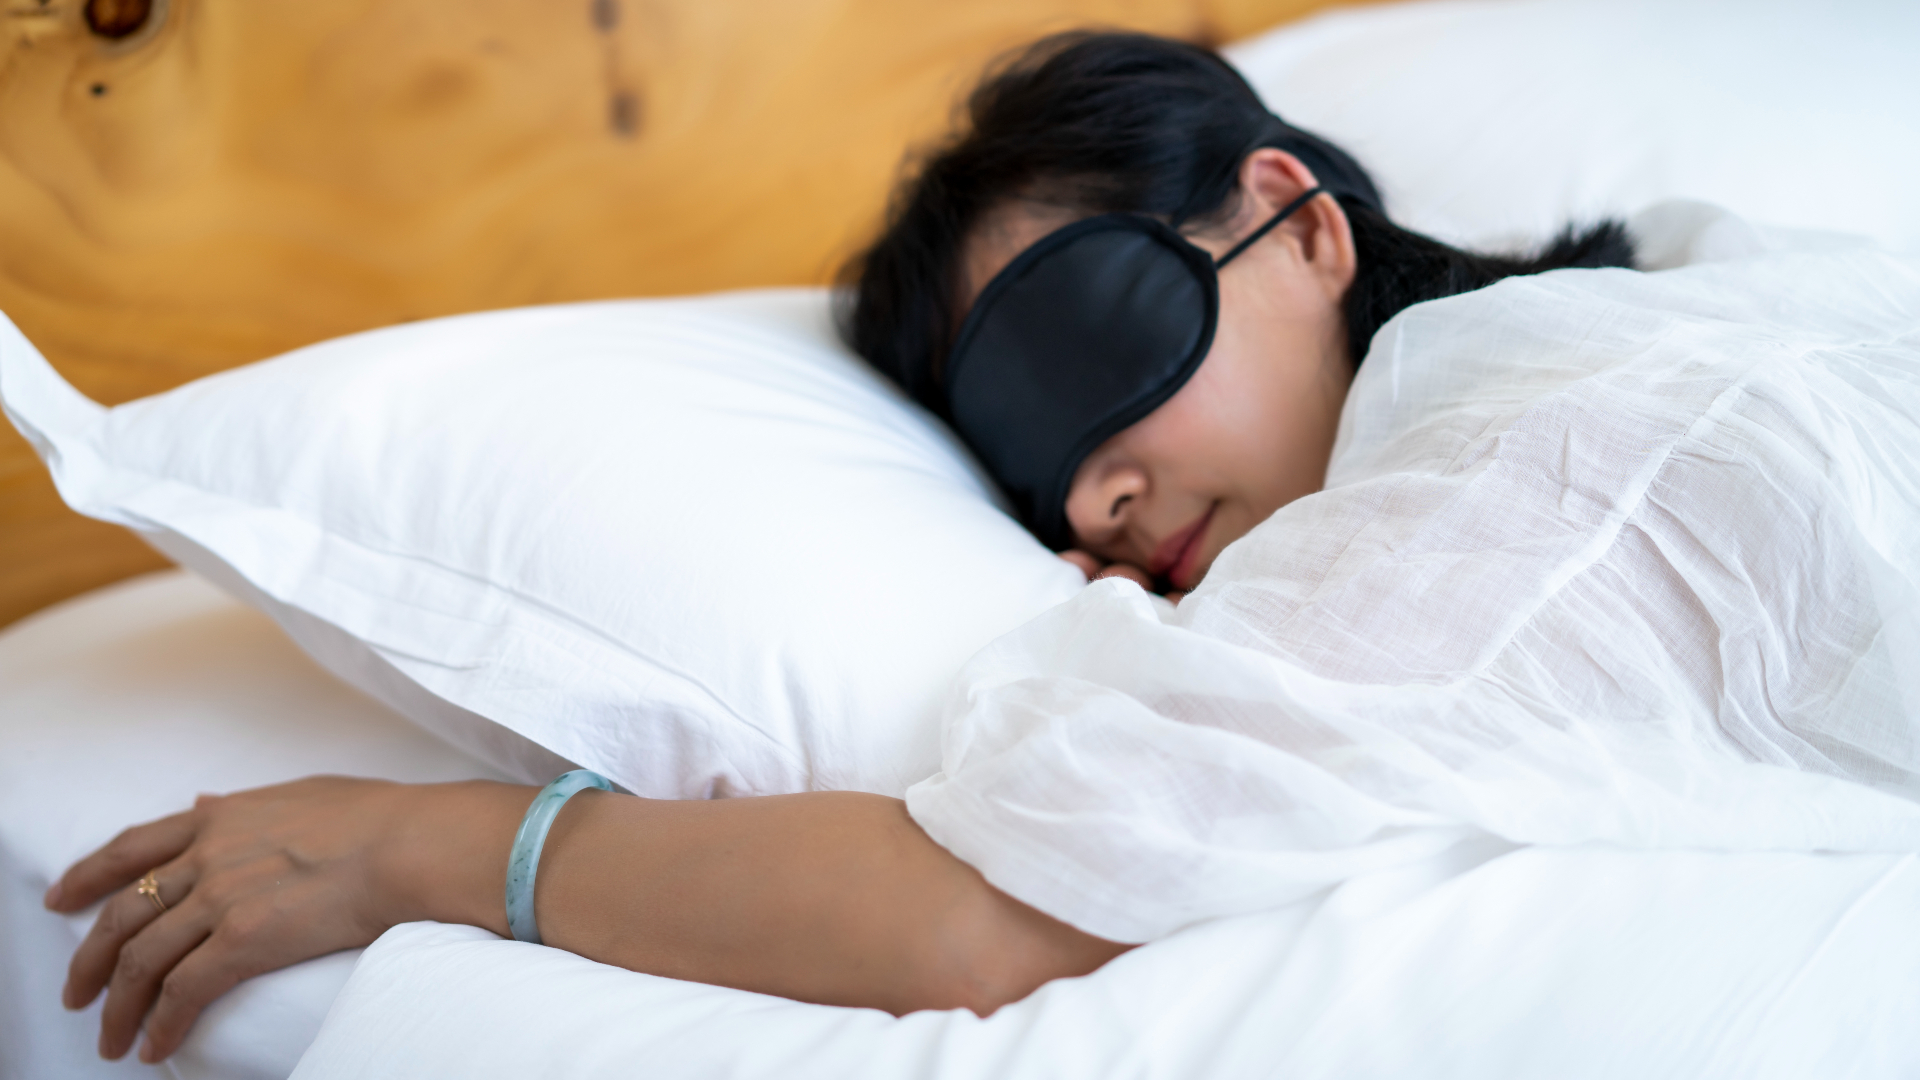 A woman sleeping with an eyemask on.